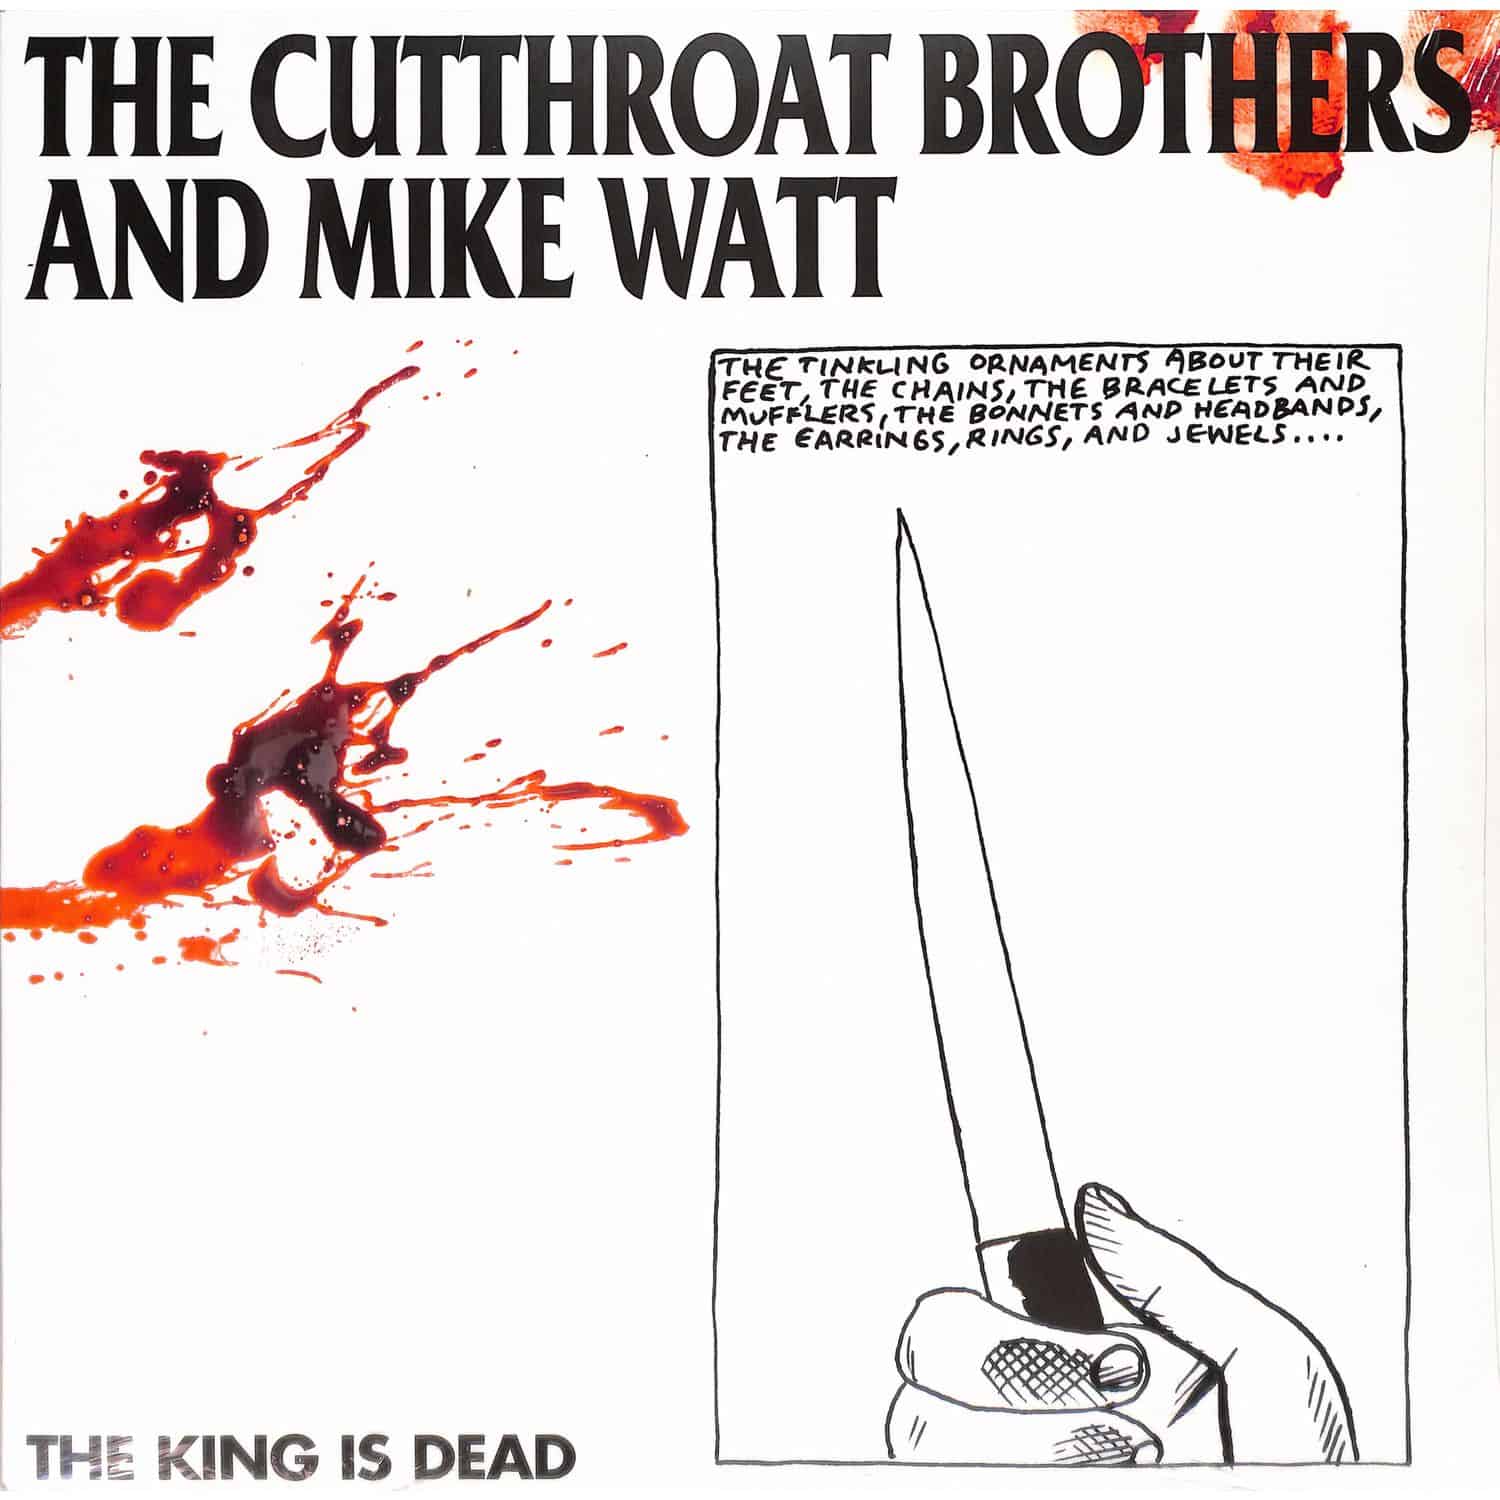 The Cutthroat Brothers / Mike Watt - THE KING IS DEAD 